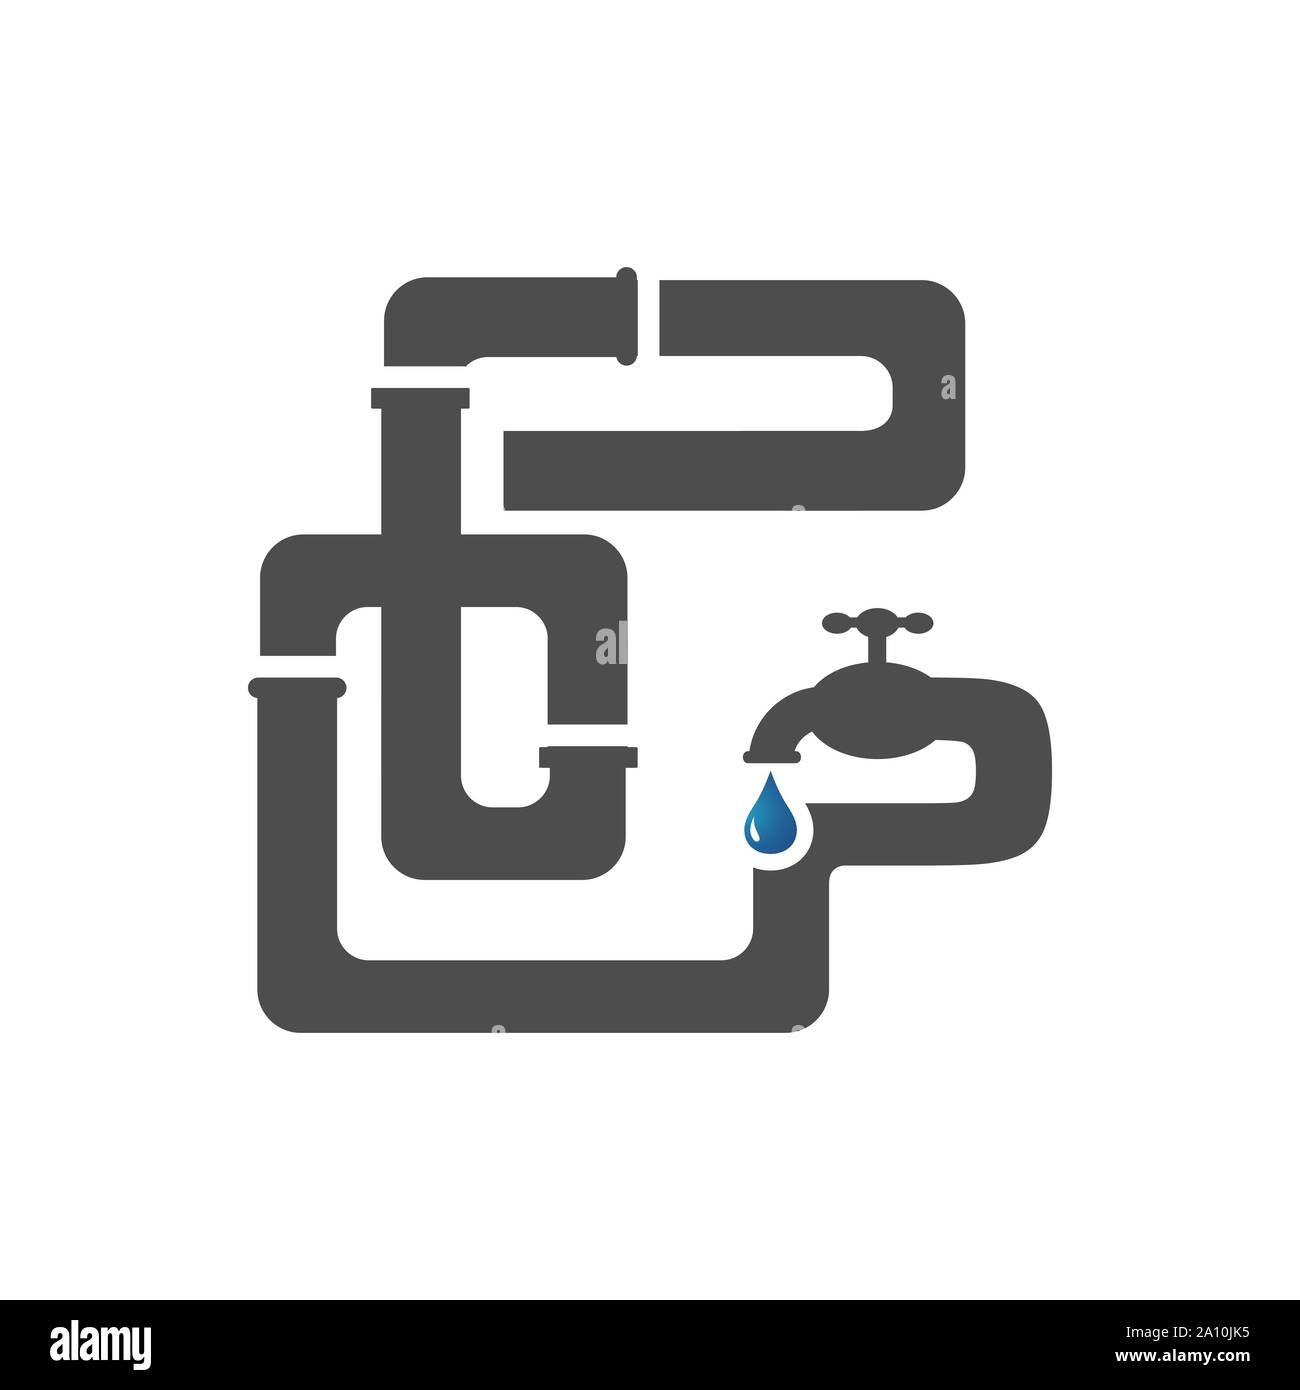 sanitary plumbing logo symbol icon of pipe and drop water in white background vector illustration Stock Vector